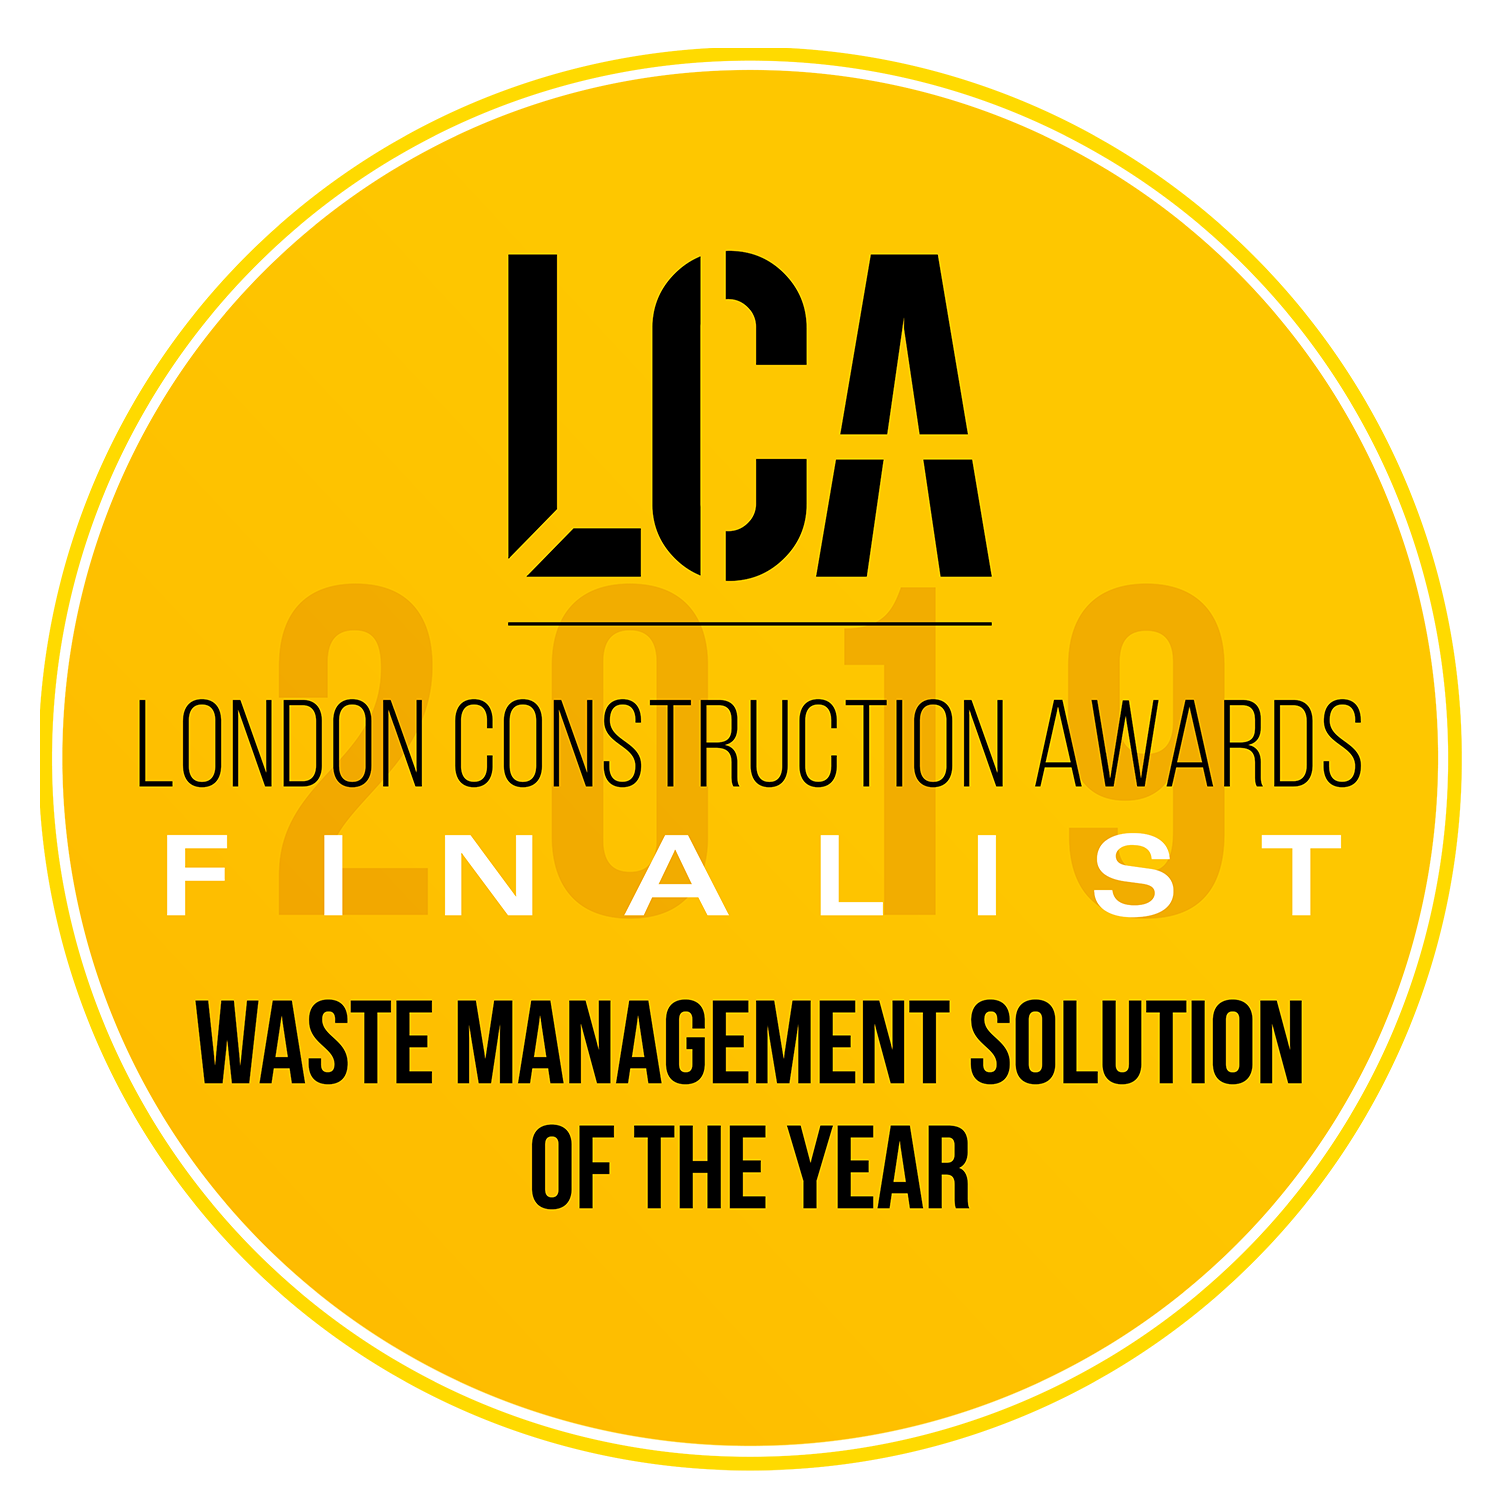 Waste Management Solution of the Year Award - email signature copy.png